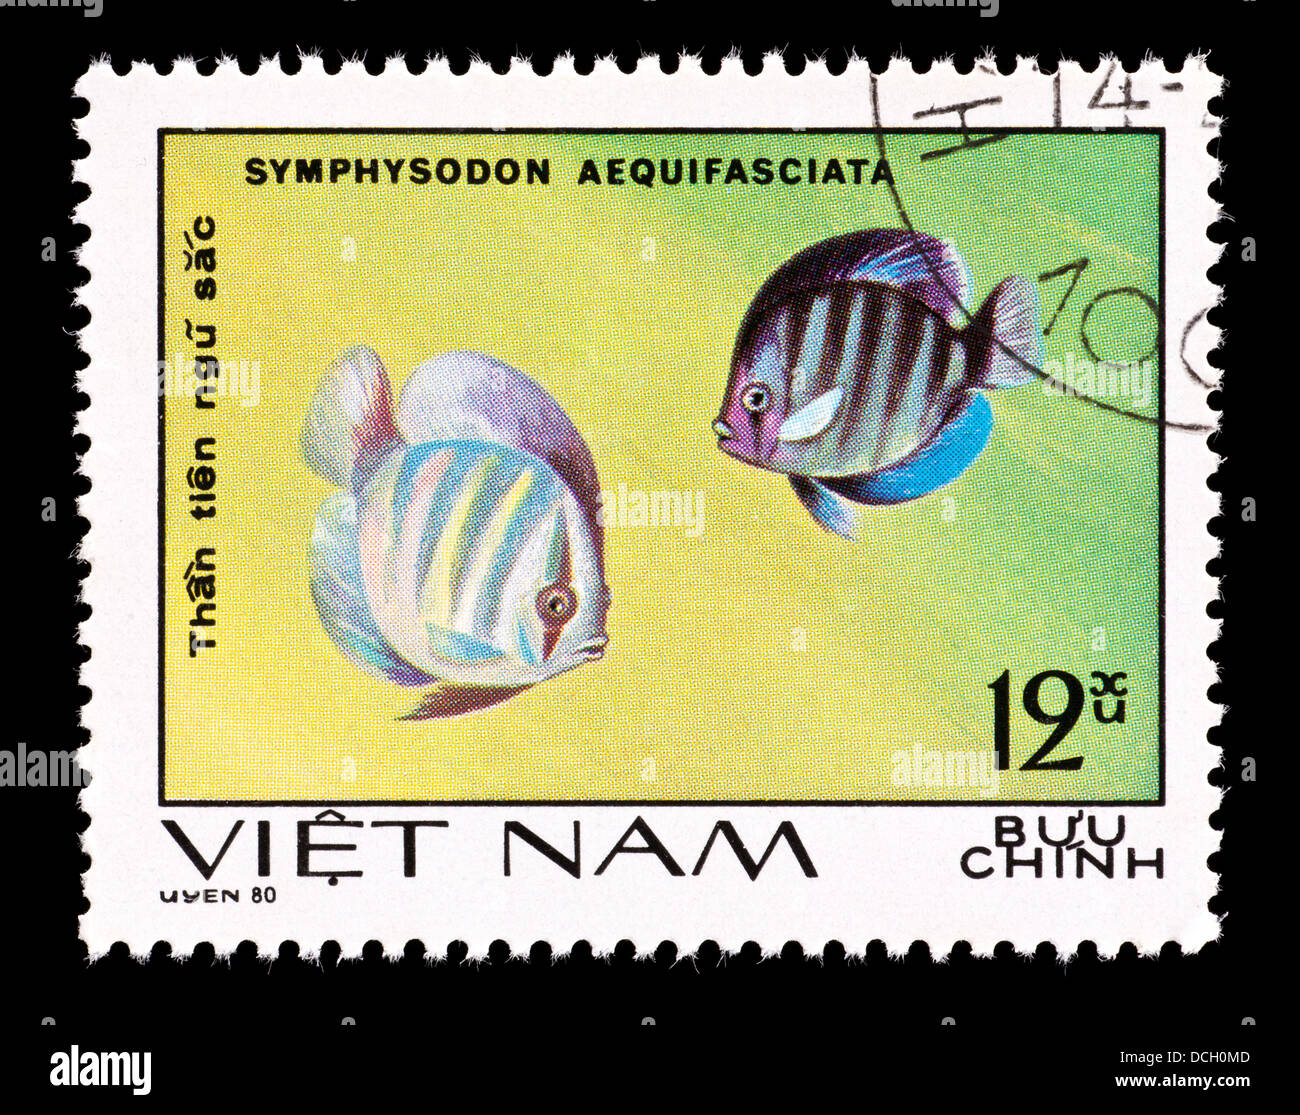 Postage stamp from Vietnam depicting a discus fish (Symphysodon aequifasciata) Stock Photo